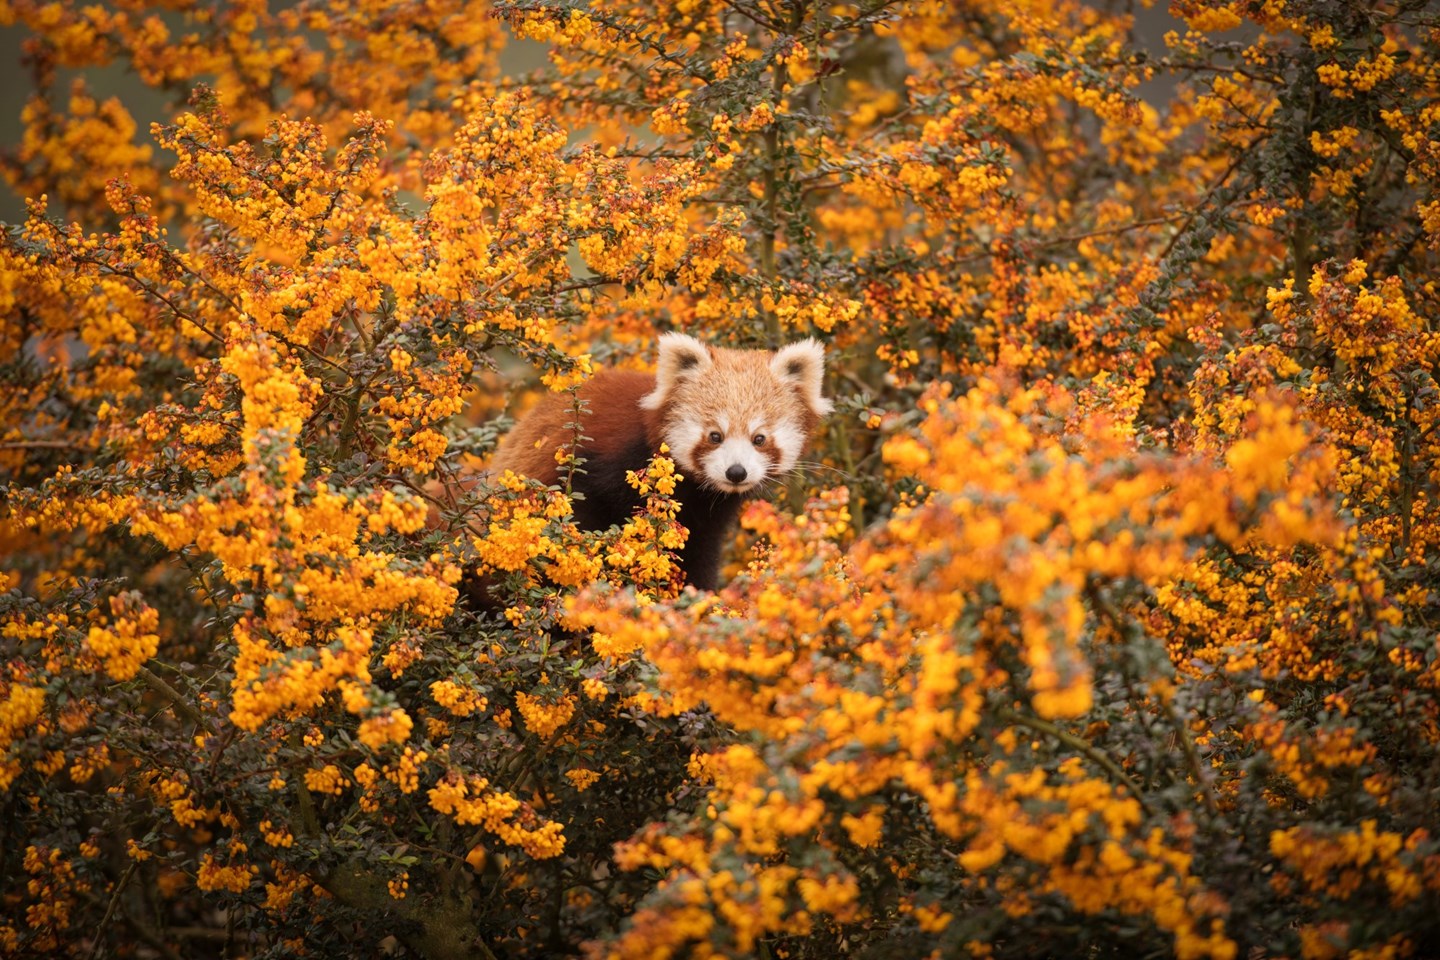 Red panda looks at camera surrounded by orange flowers 